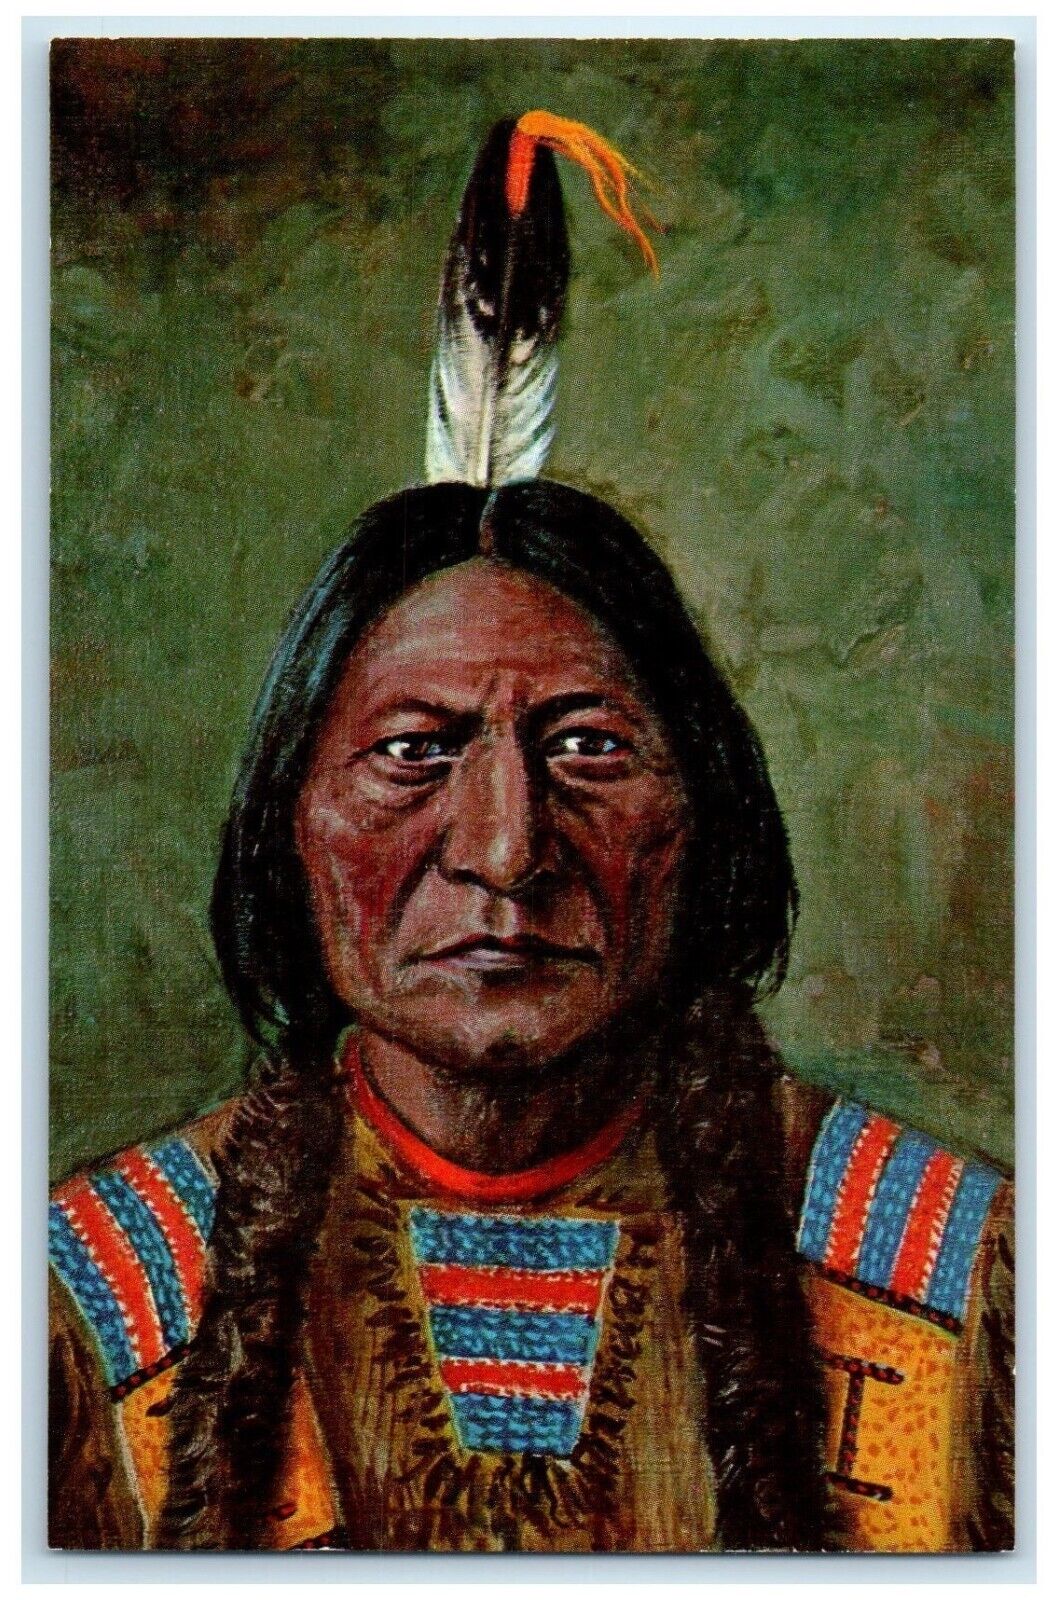 Sitting Bull Indian Chief Of Sioux Tribe Buffalo Bill Memorial Museum Postcard